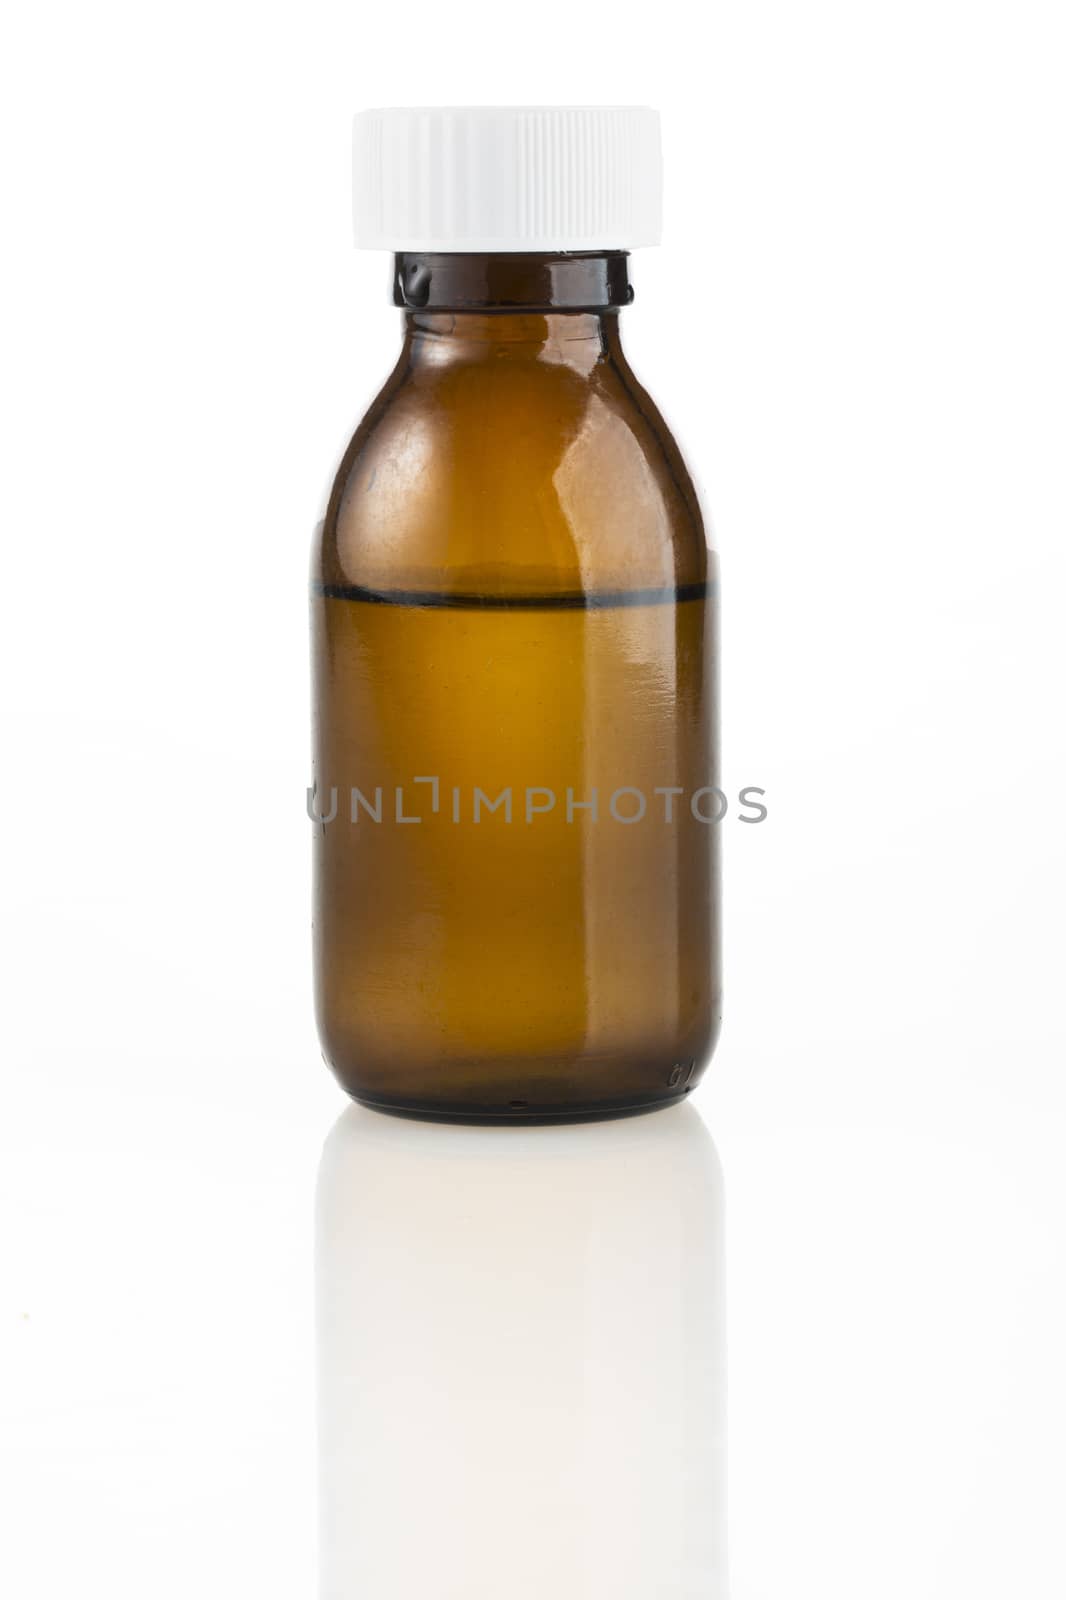 Brown medicine bottle with liquid inside and white top.